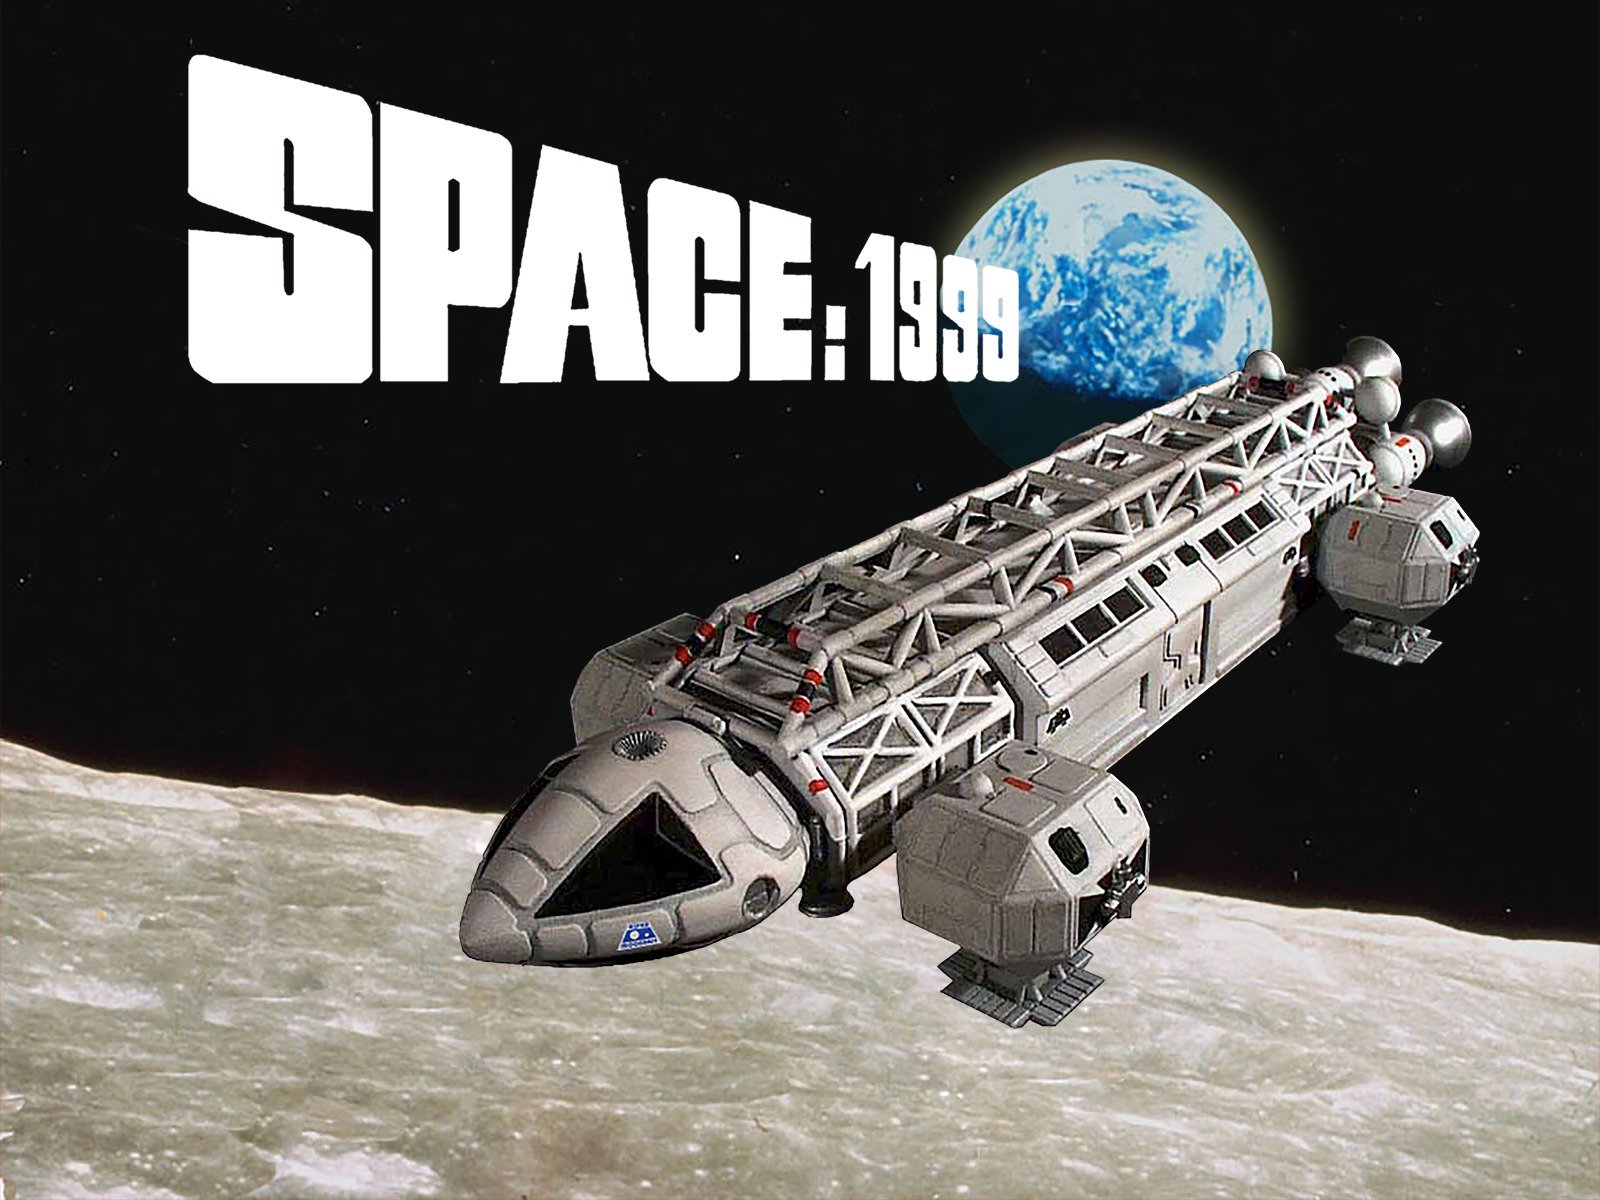 space-1999-logo-and-eagle.jpg